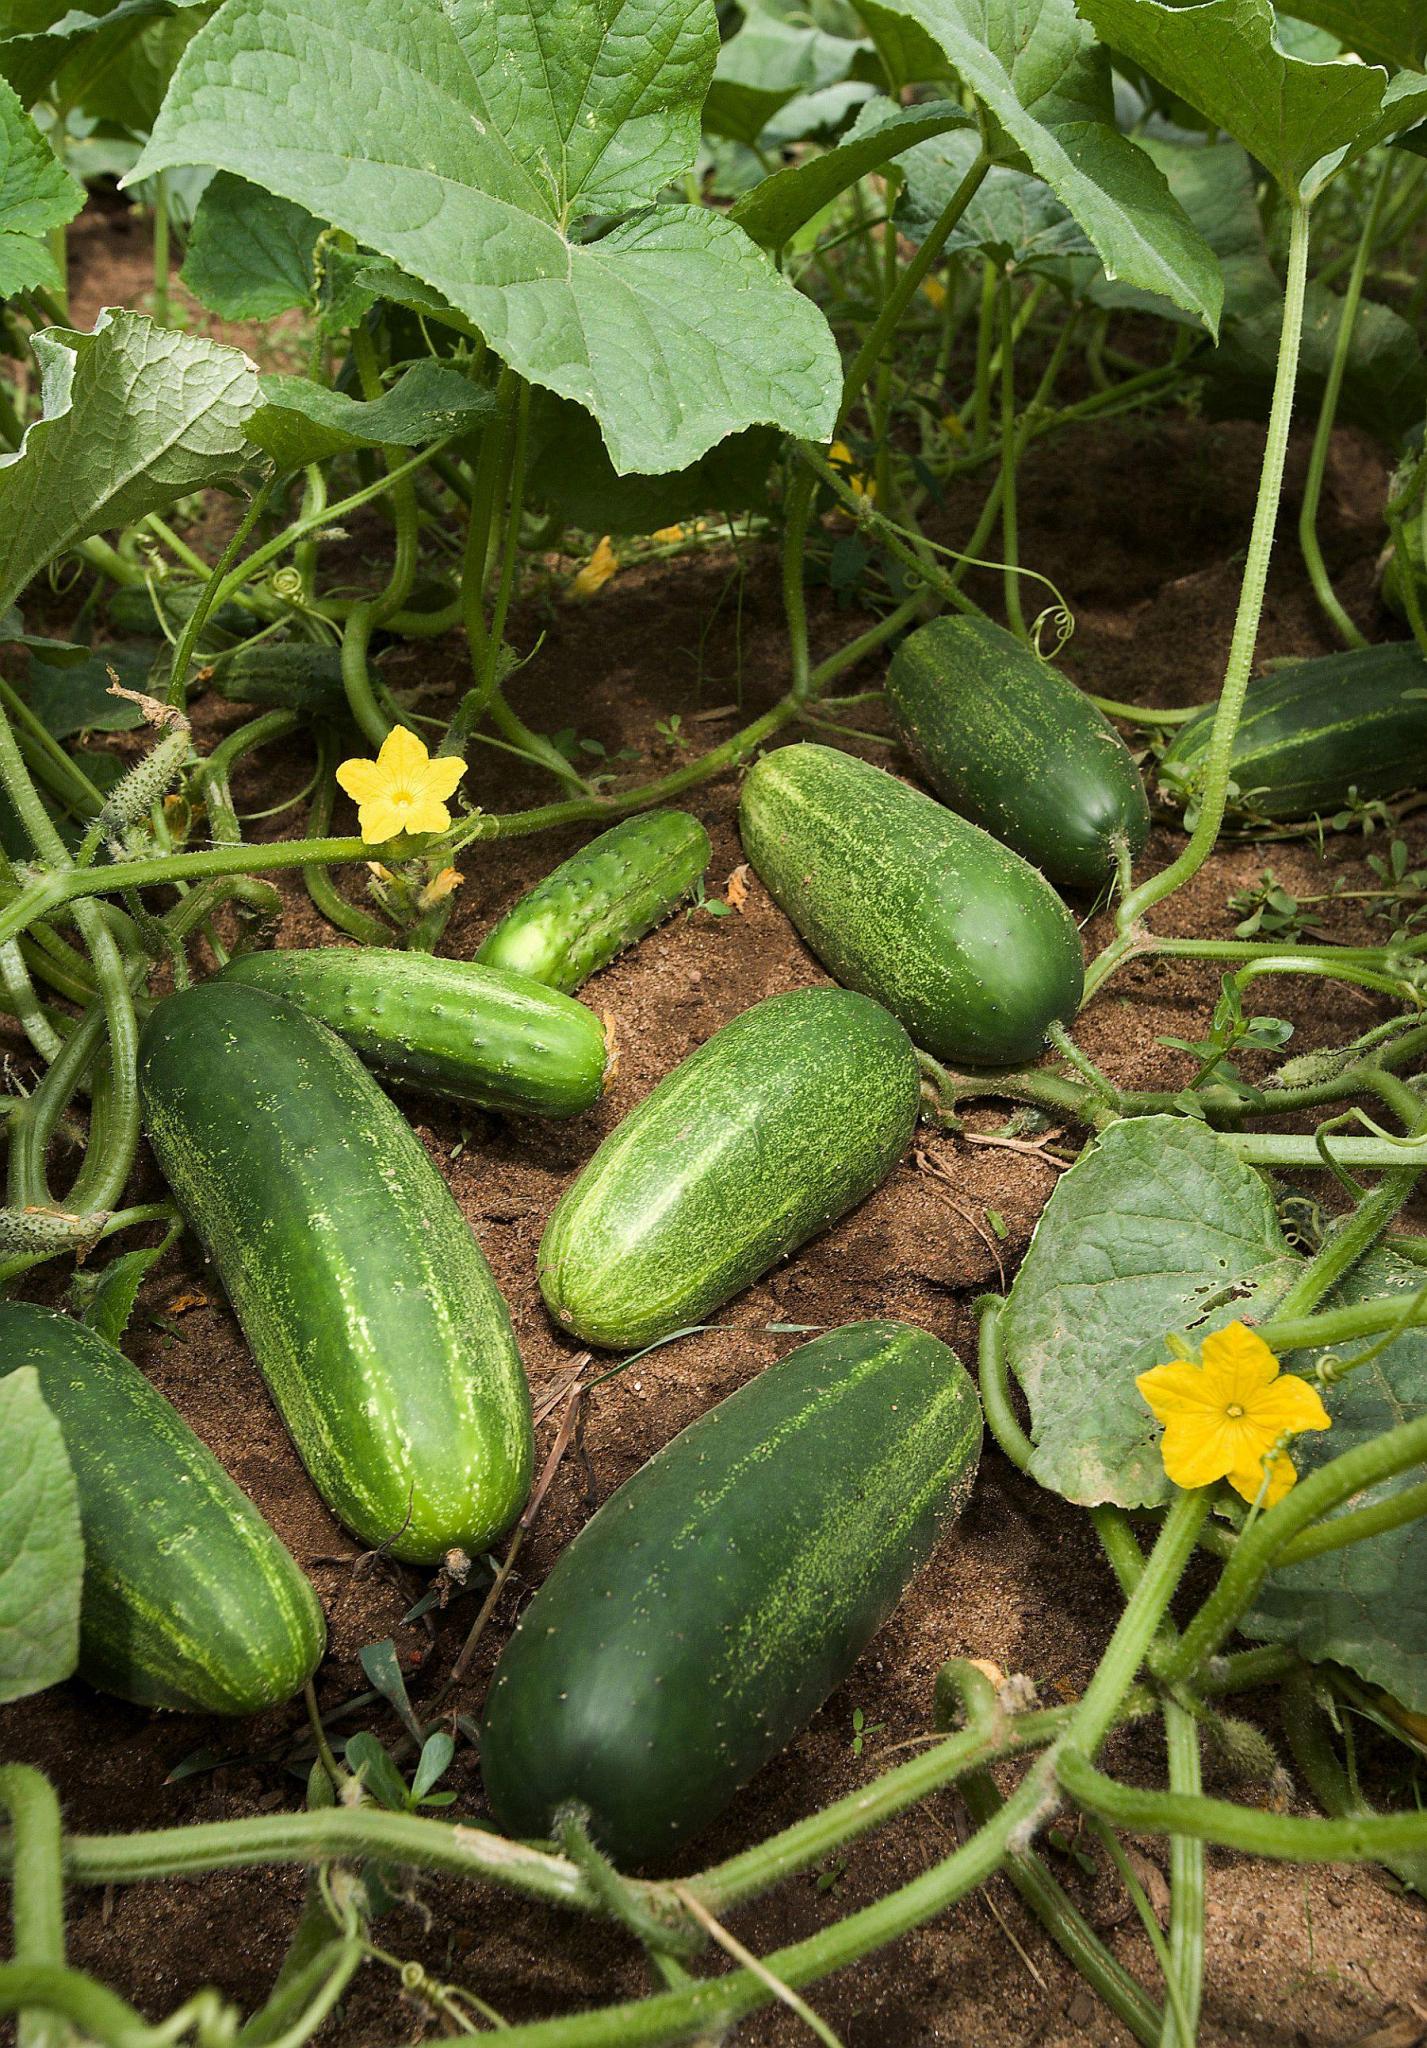 Image of Cucumber plant in summer